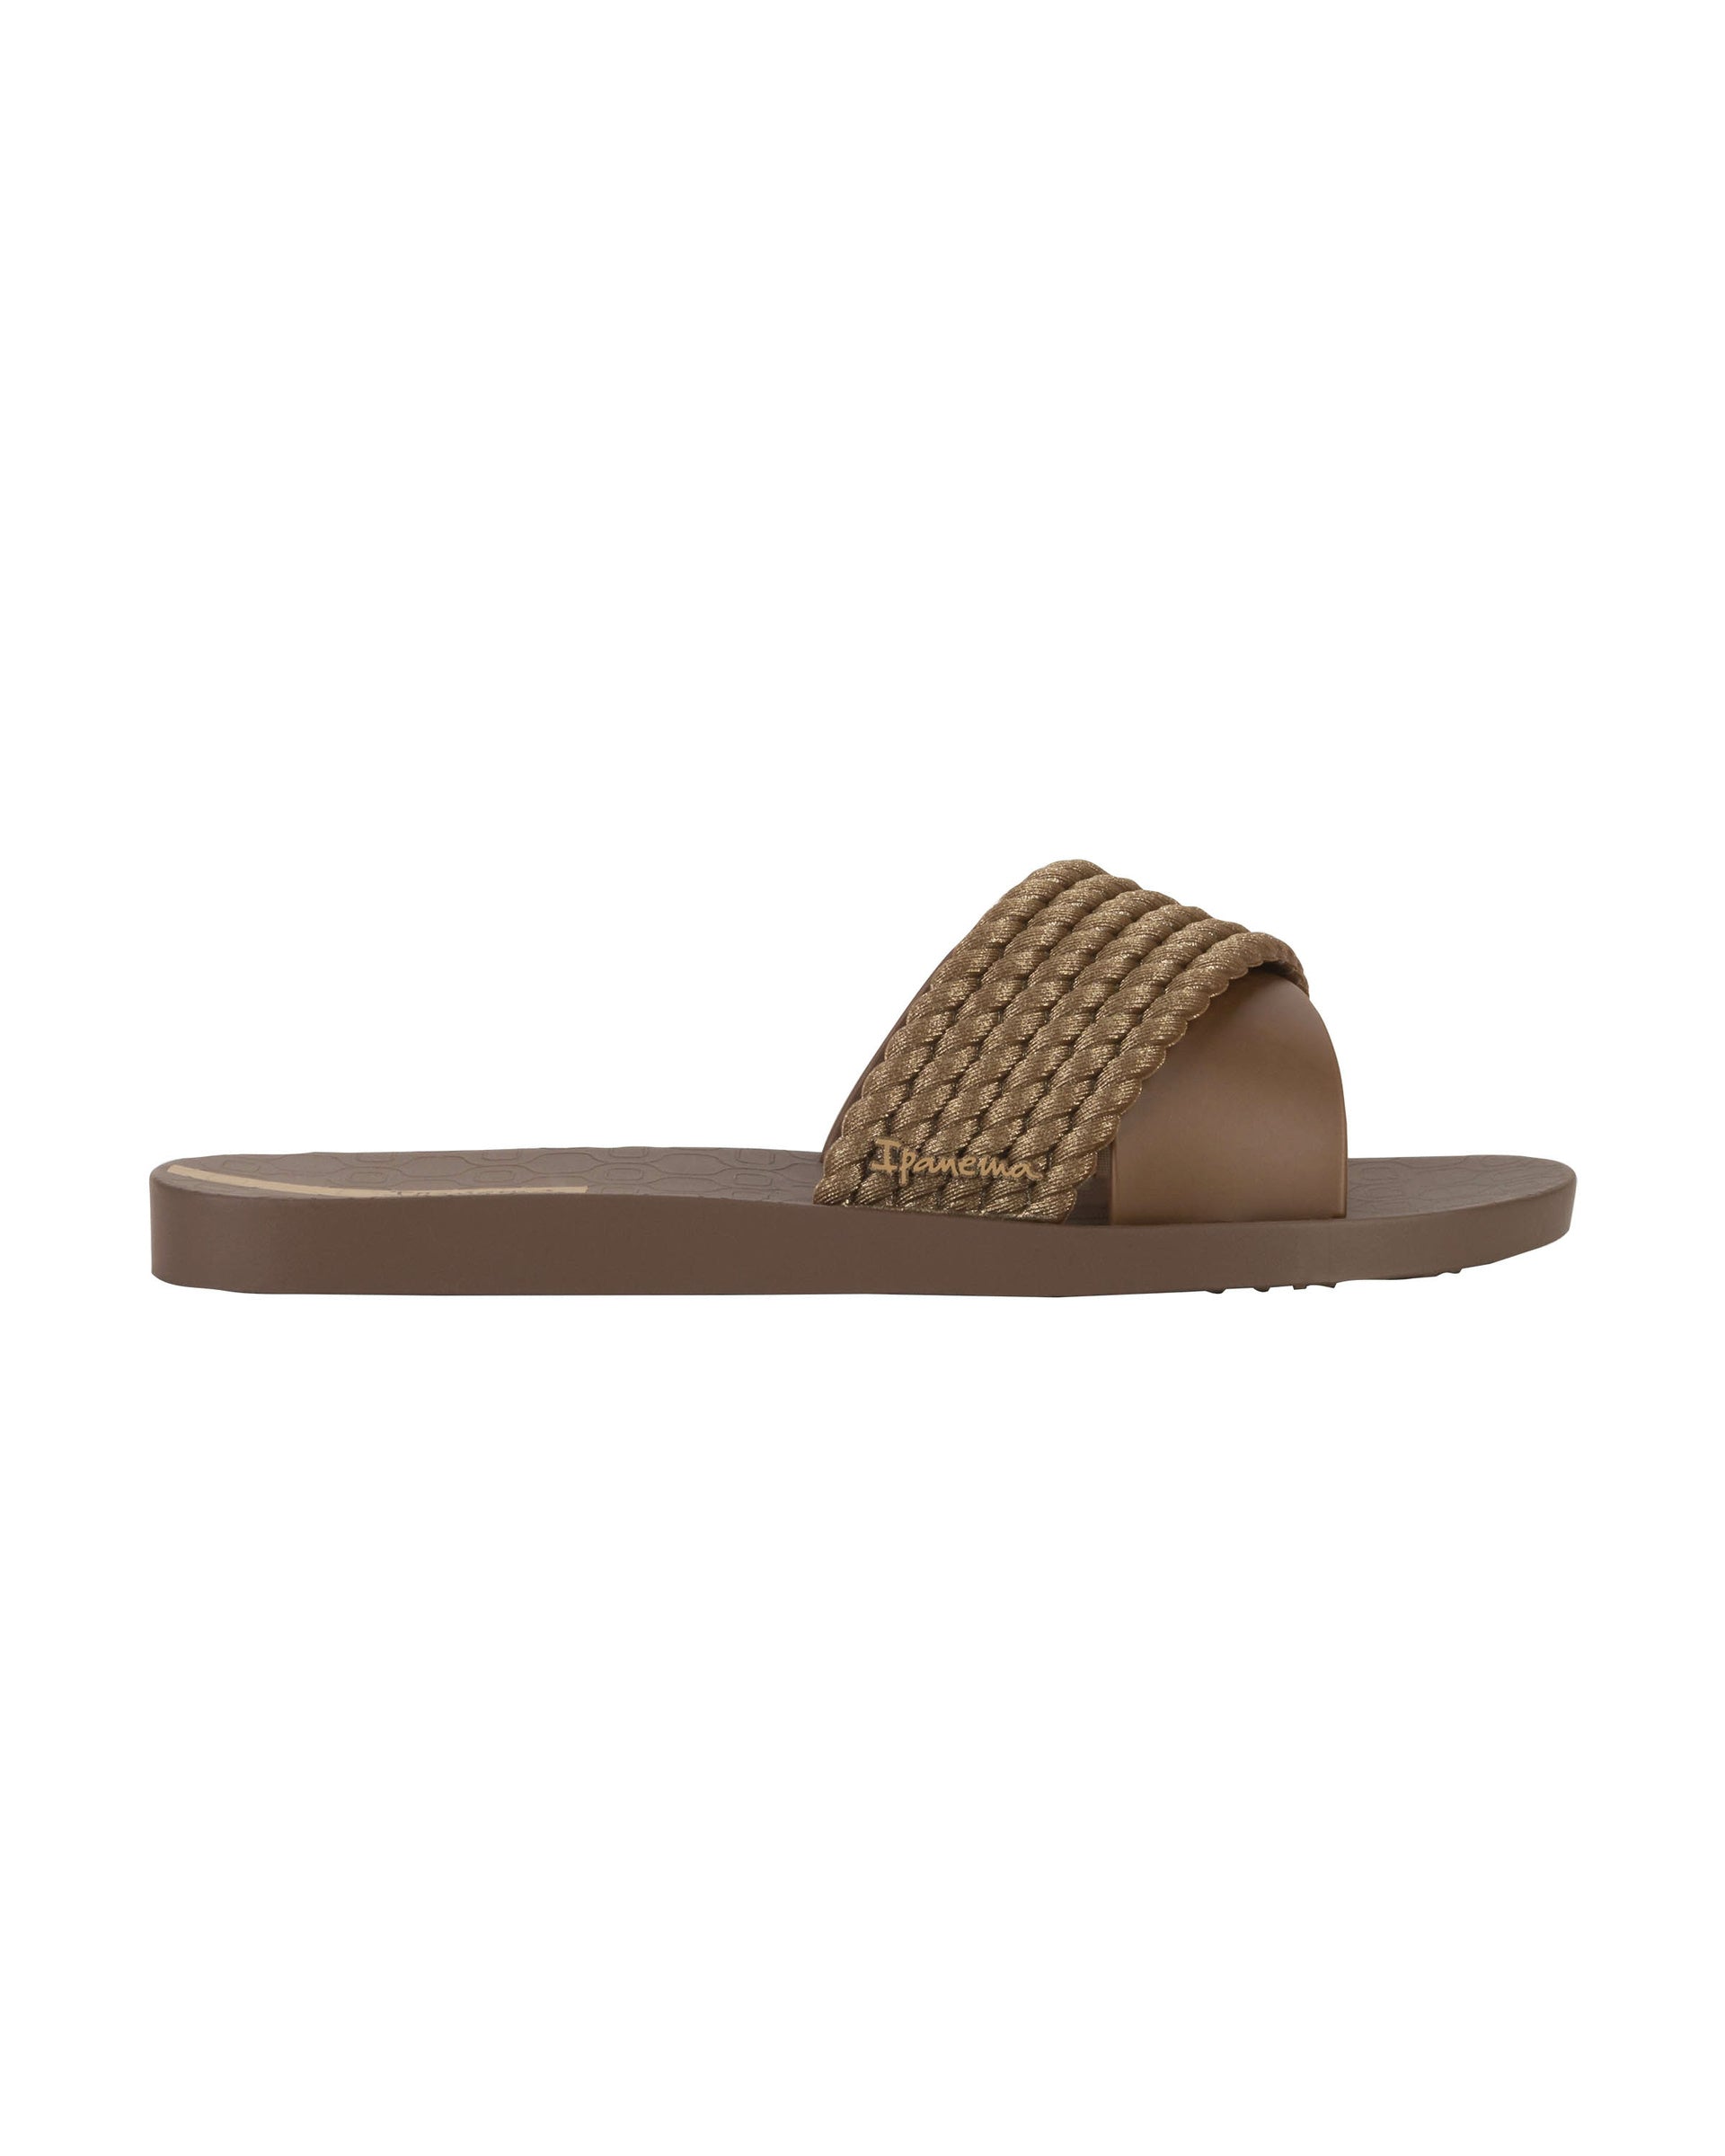 Outer side view of a brown Ipanema Street women's slide.